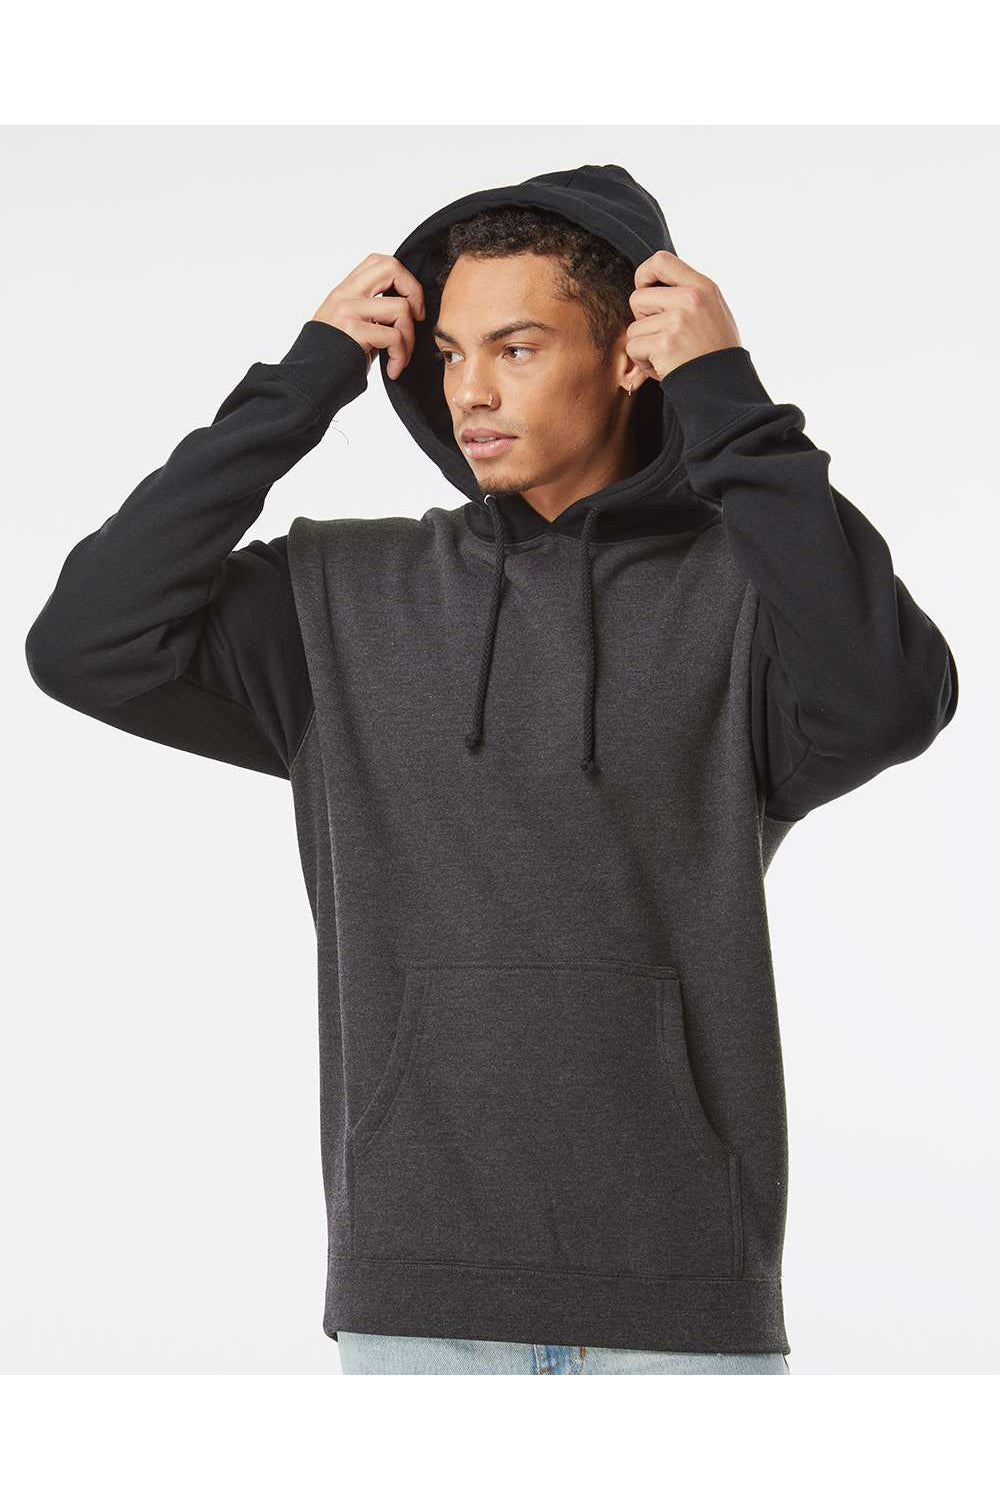 Independent Trading Co. IND4000 Mens Hooded Sweatshirt Hoodie Heather Charcoal Grey/Black Model Front